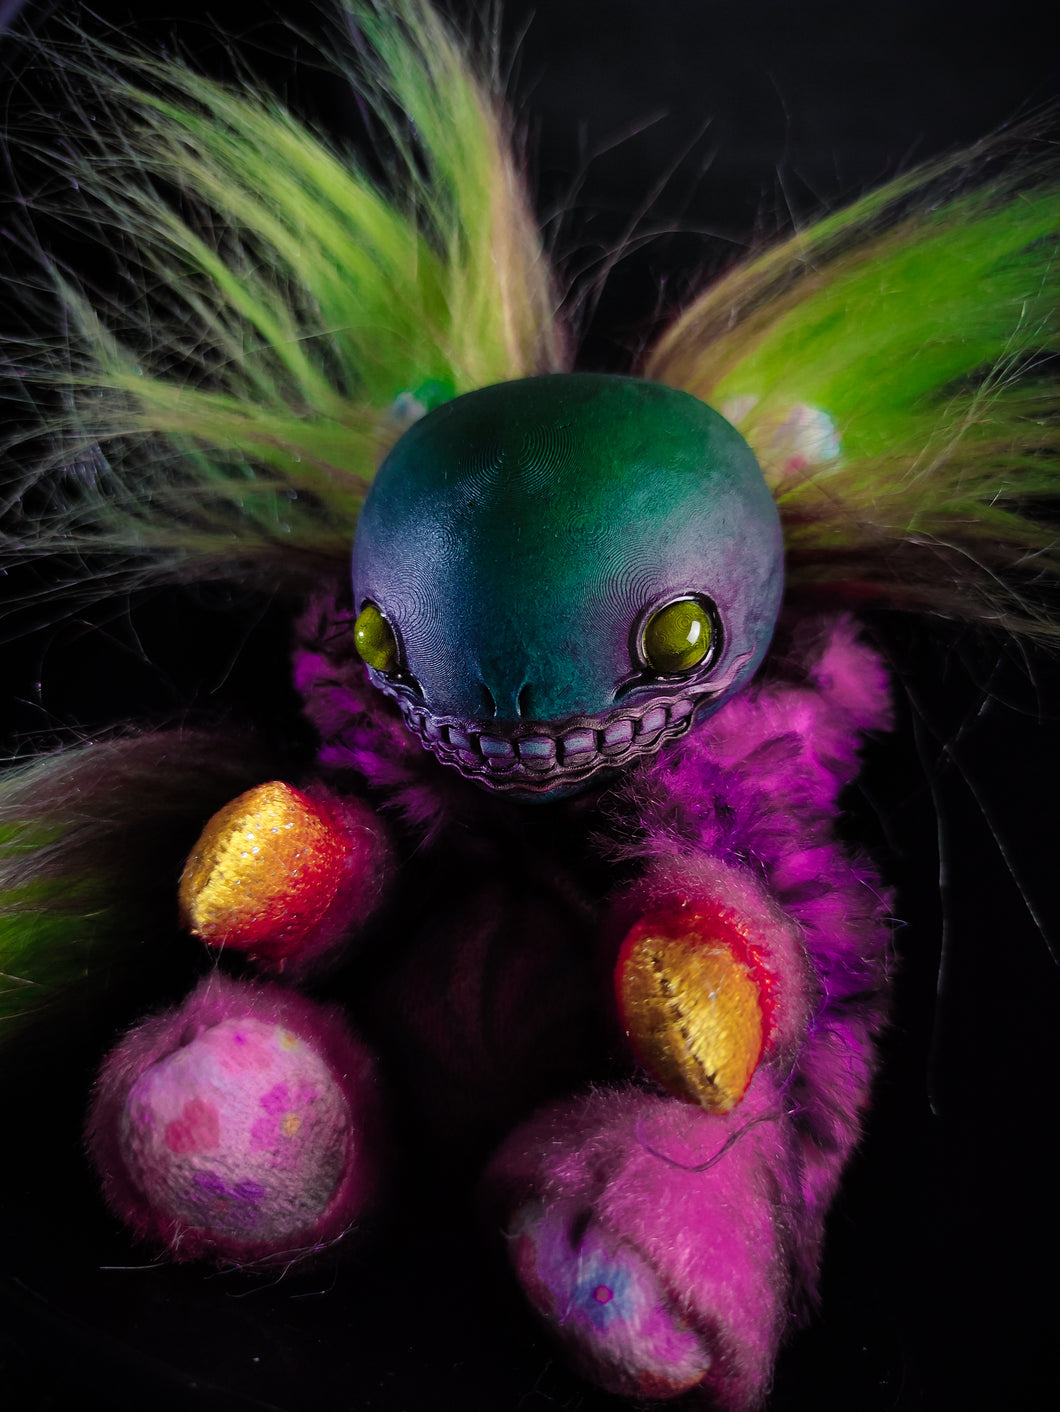 FRIEND Radioactive Flavour - Cryptid Art Doll Plush Toy